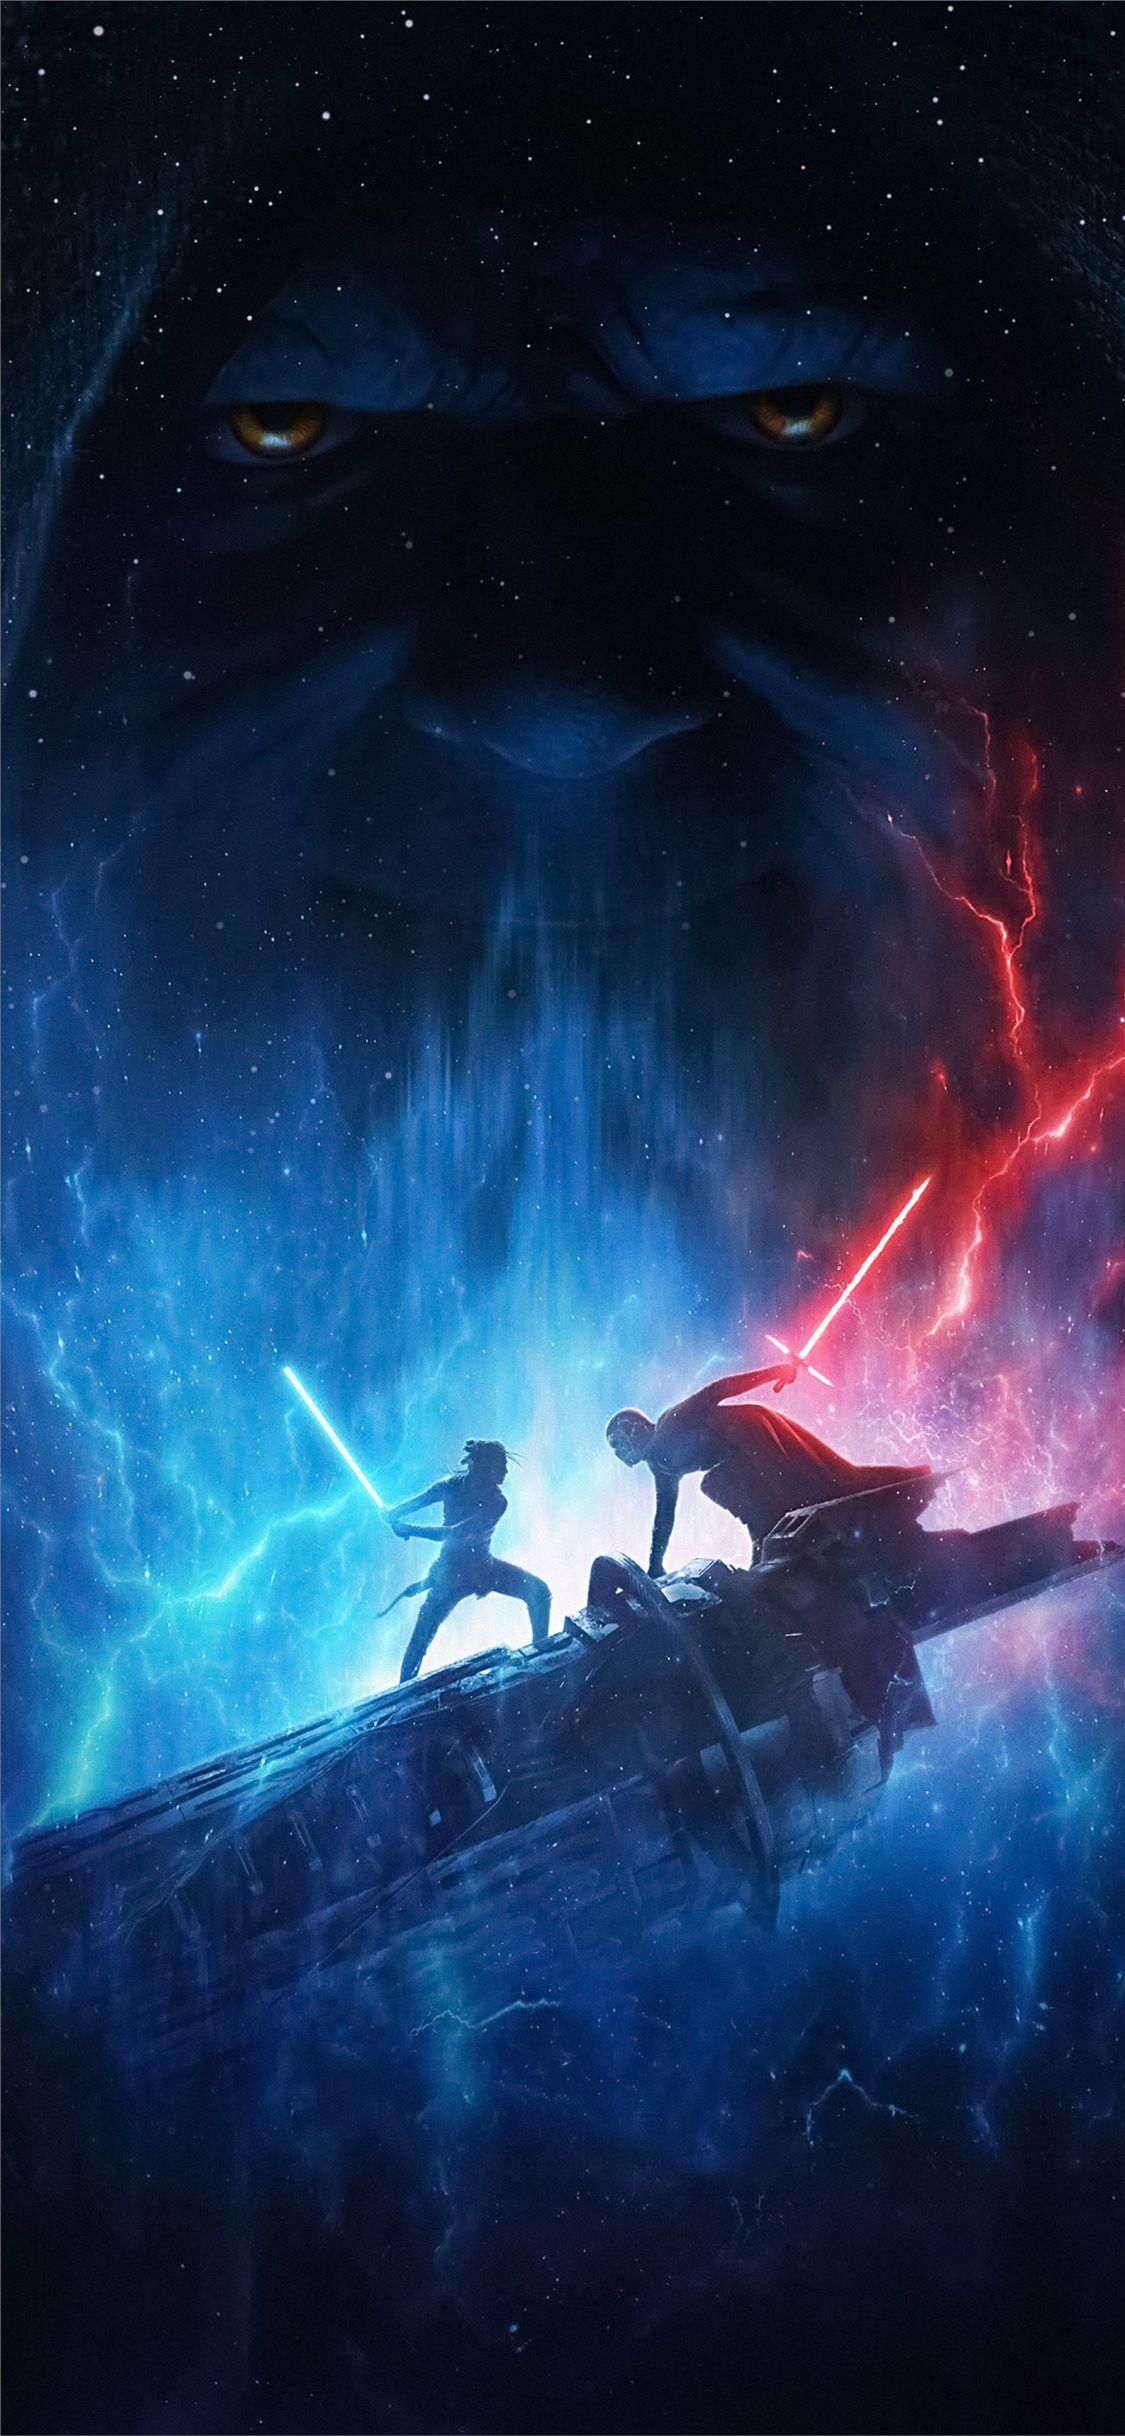 Free download the star wars the rise of skywalker 2019 4k